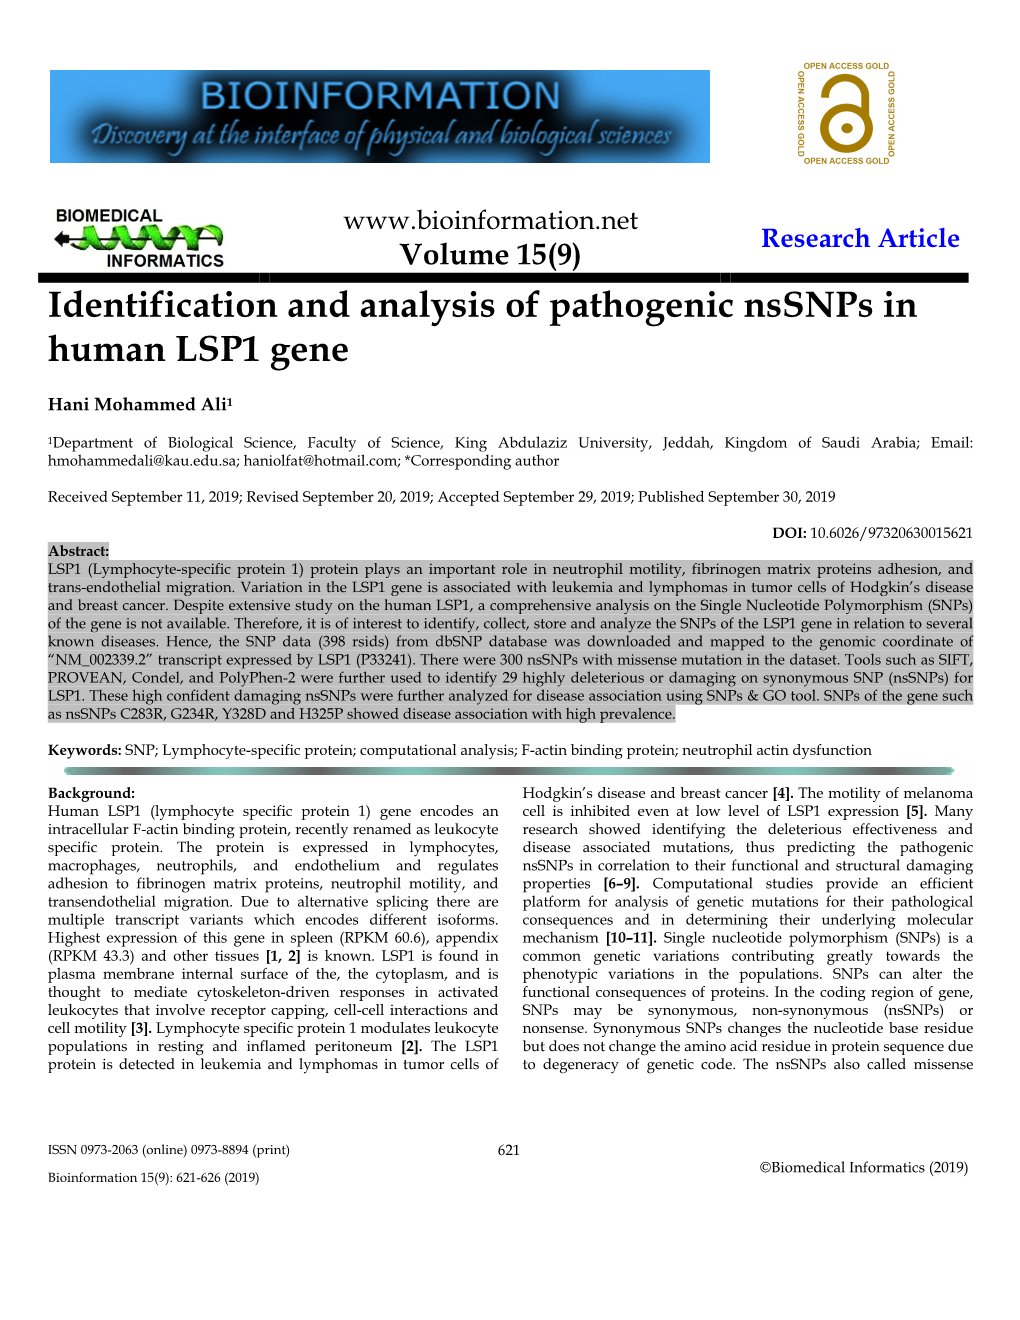 Identification and Analysis of Pathogenic Nssnps in Human LSP1 Gene